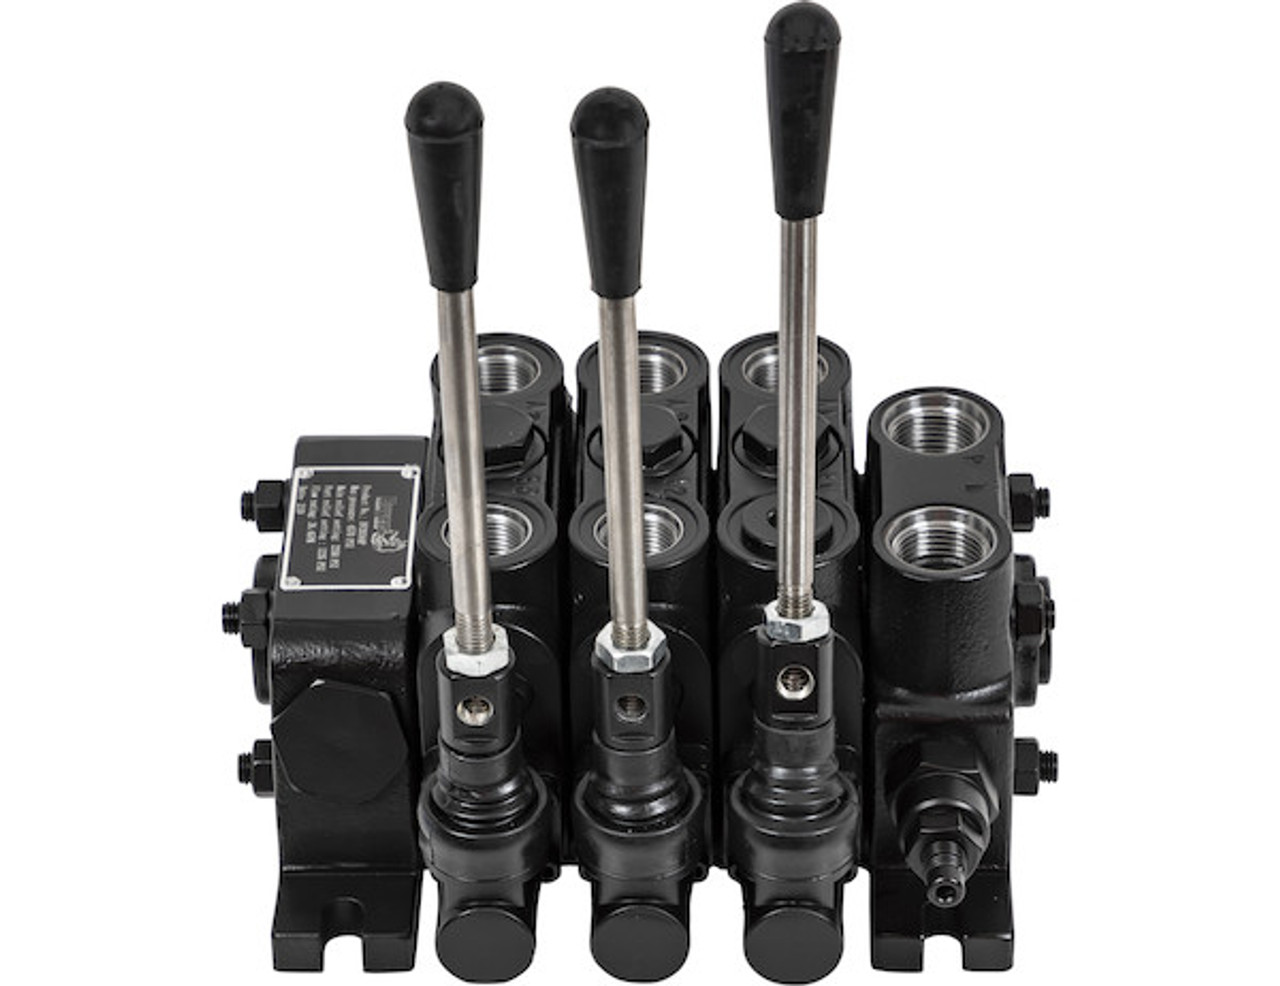 BV20344P - 21 GPM Valves 4-Way with 2 Port Reliefs and Power Beyond